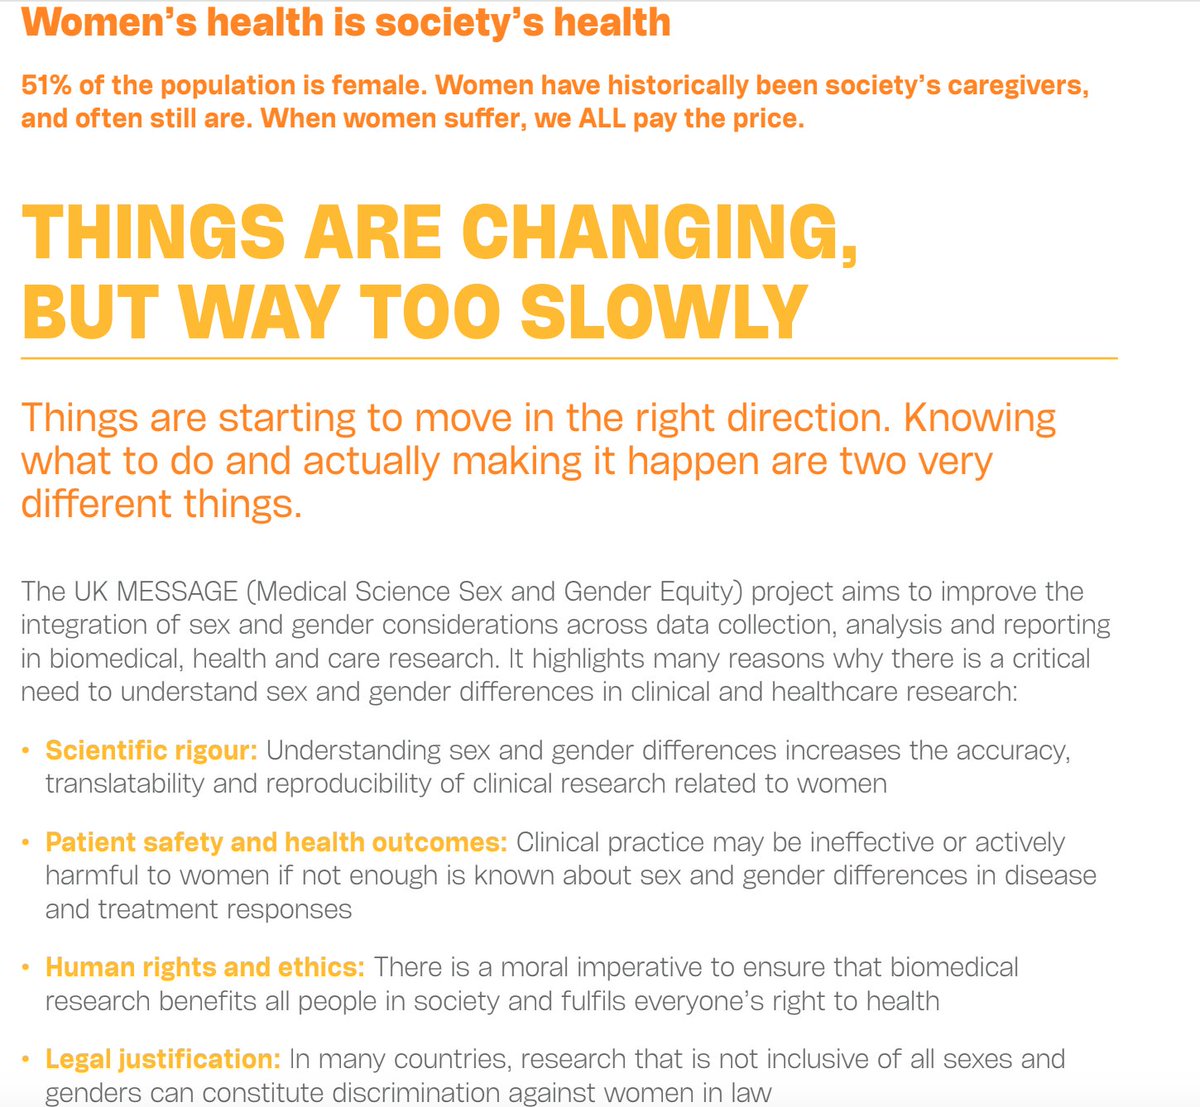 Excellent to see @MESSAGE_TGI featured in this important white paper on women's inclusion in medical research and women's health. #BeyondBikiniMedicine